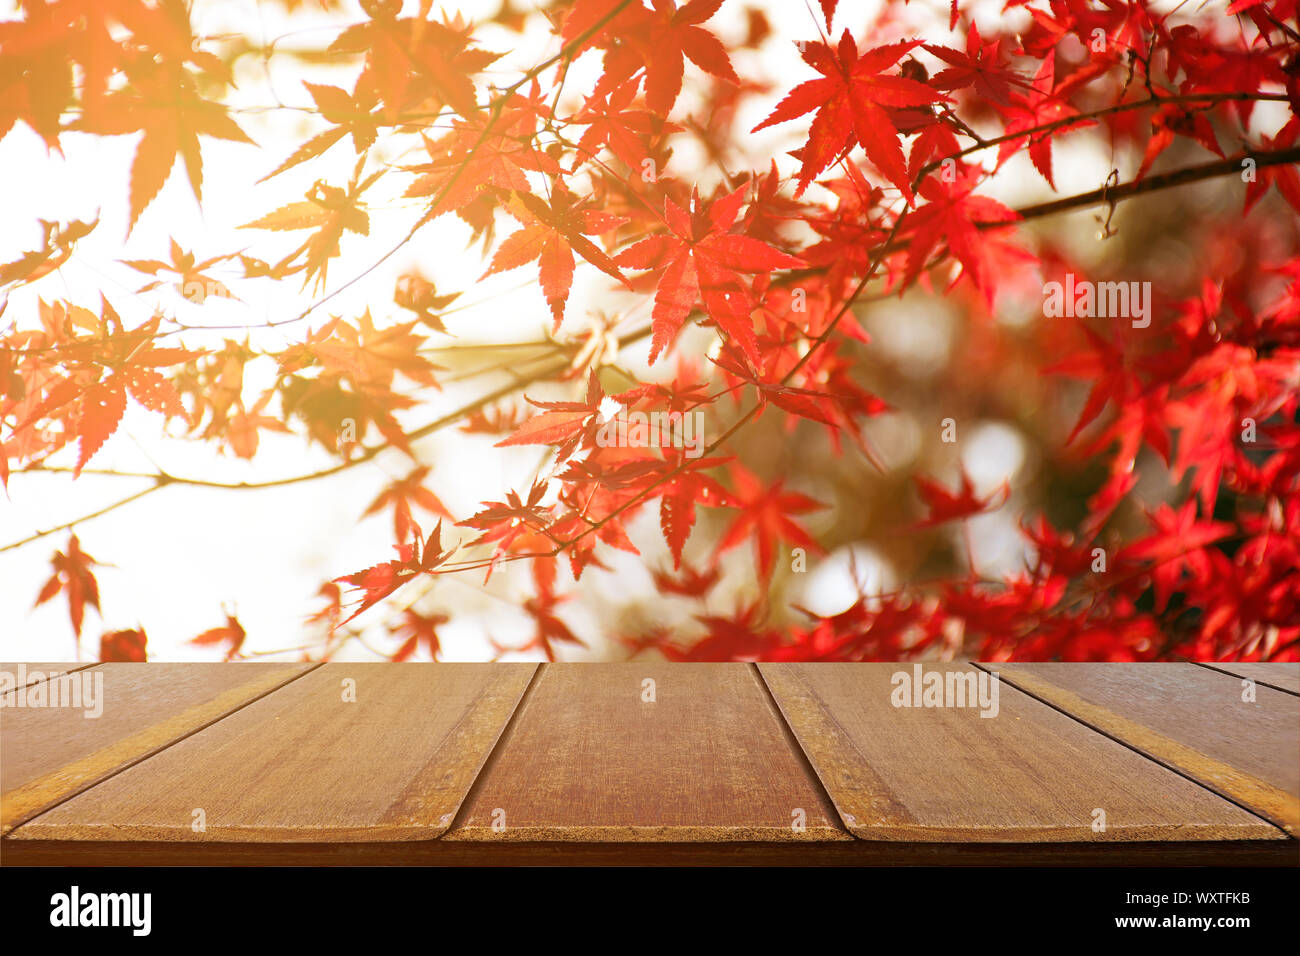 Picnic table with Japanese maple tree garden in autumn. Fully red Maple leaves in Autumn. Autumn background with warm evening light. Stock Photo